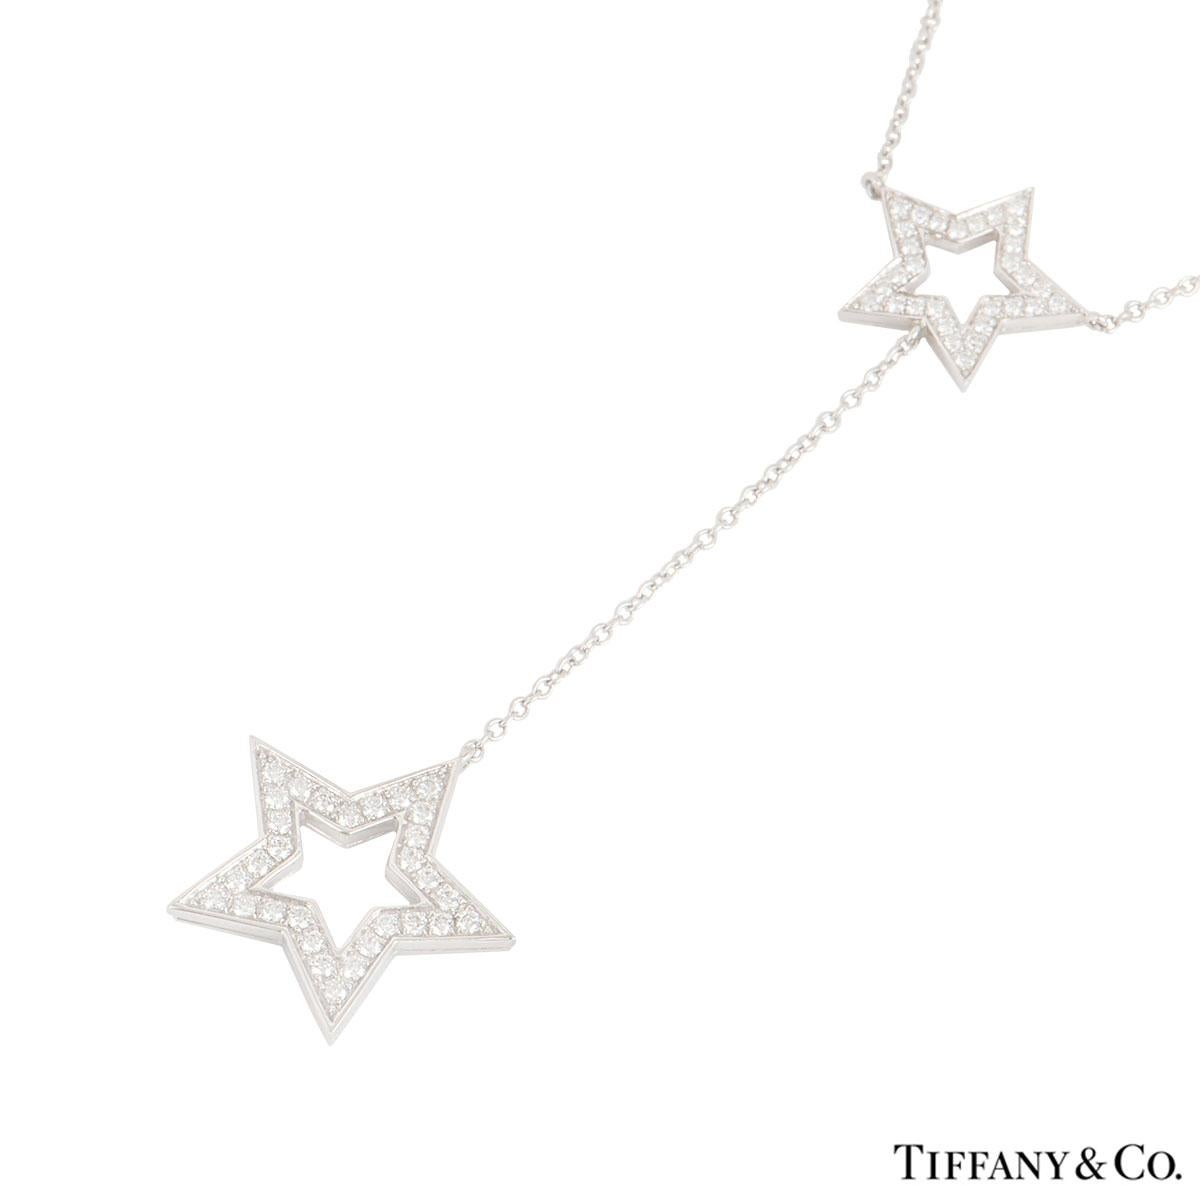 A beautiful platinum diamond set star motifs necklace by Tiffany & Co. The necklace features 2 star motifs on an integrated chain one suspended from the other with pave set round brilliant cut diamonds with an approximate weight of 0.53ct. The